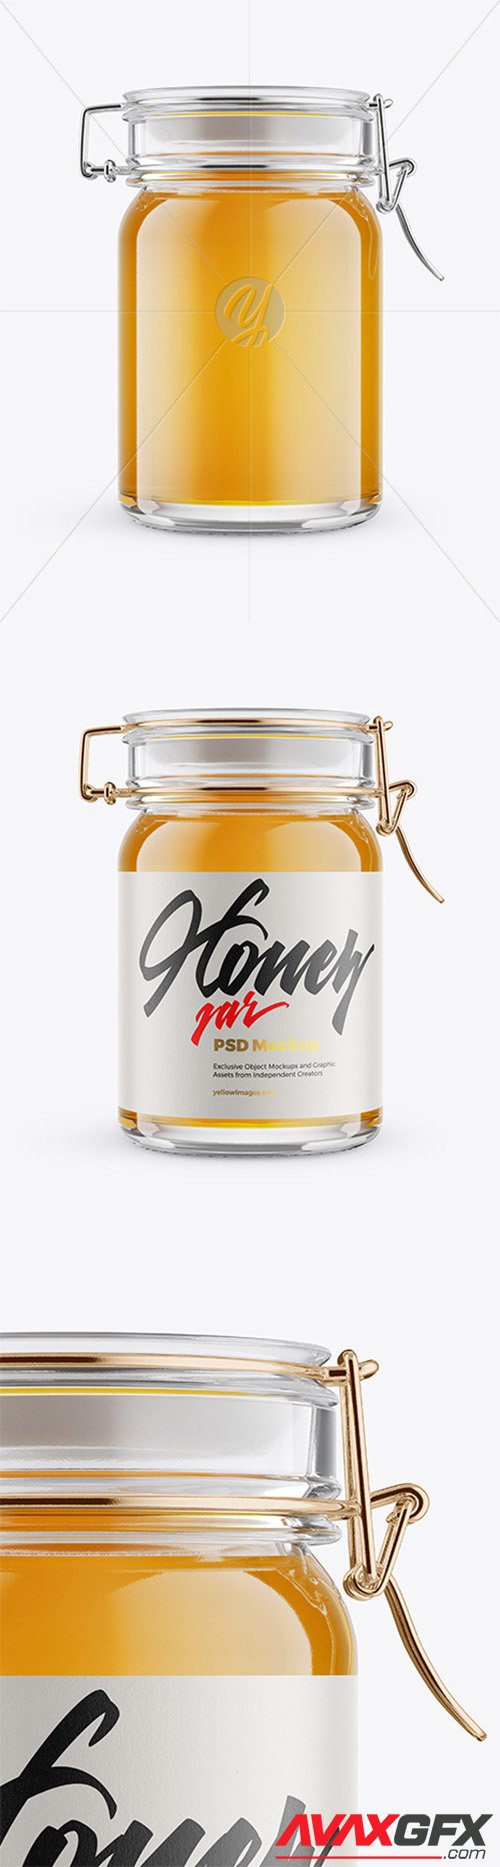 Download Glass Honey Jar With Clamp Lid Mockup 62655 » AVAXGFX - All Downloads that You Need in One Place ...